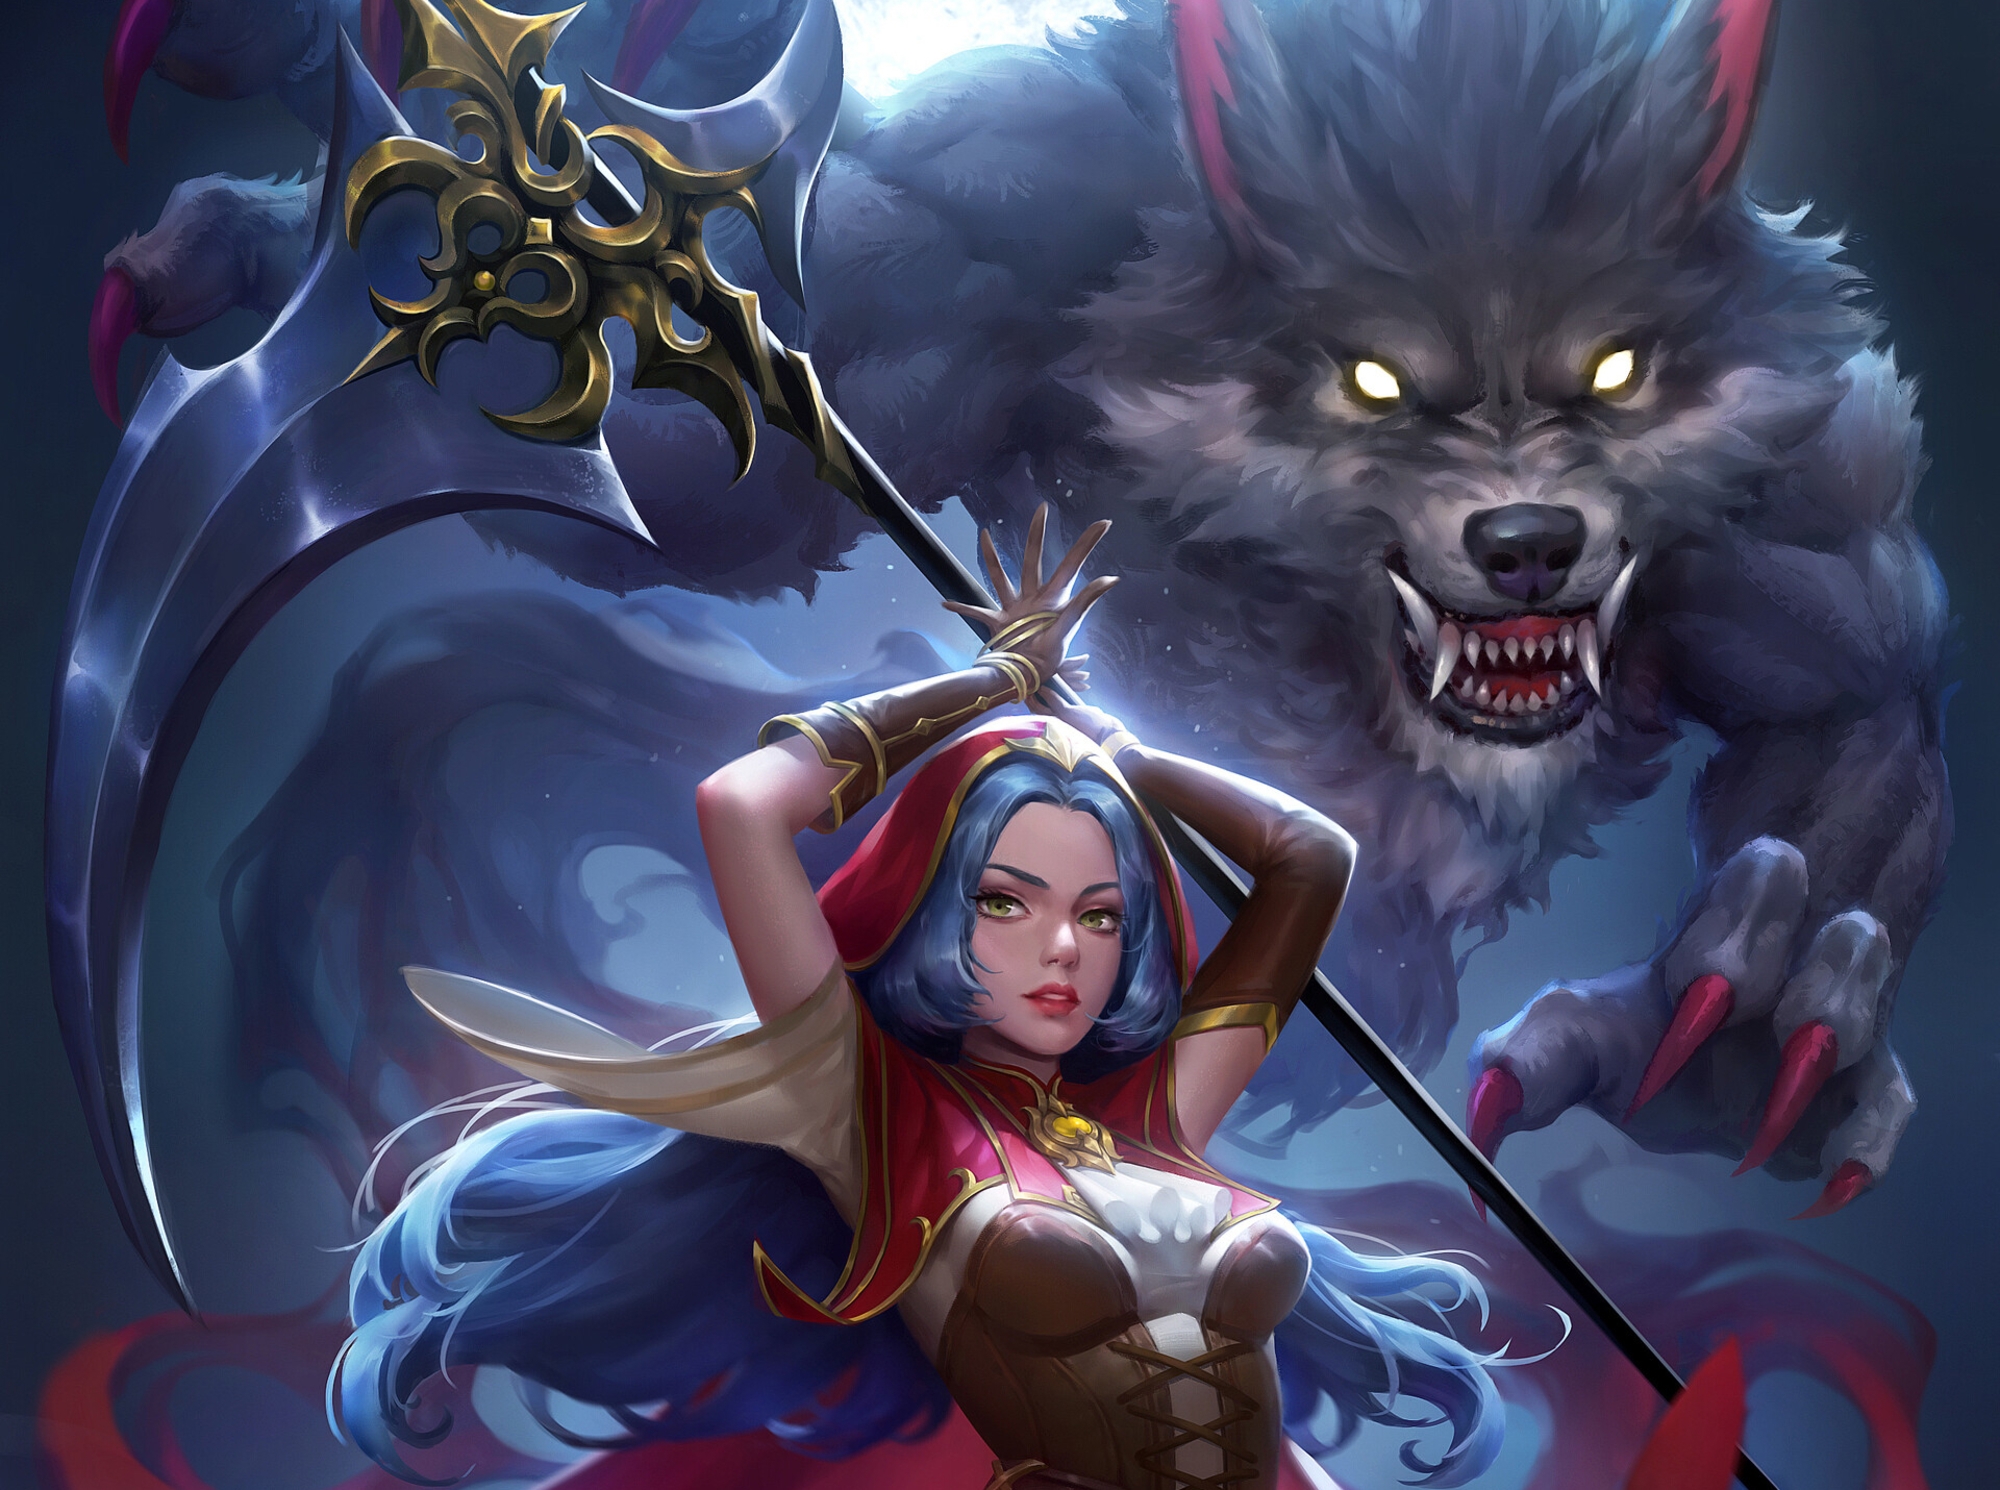 Fantasy Red Riding Hood HD Wallpaper | Background Image